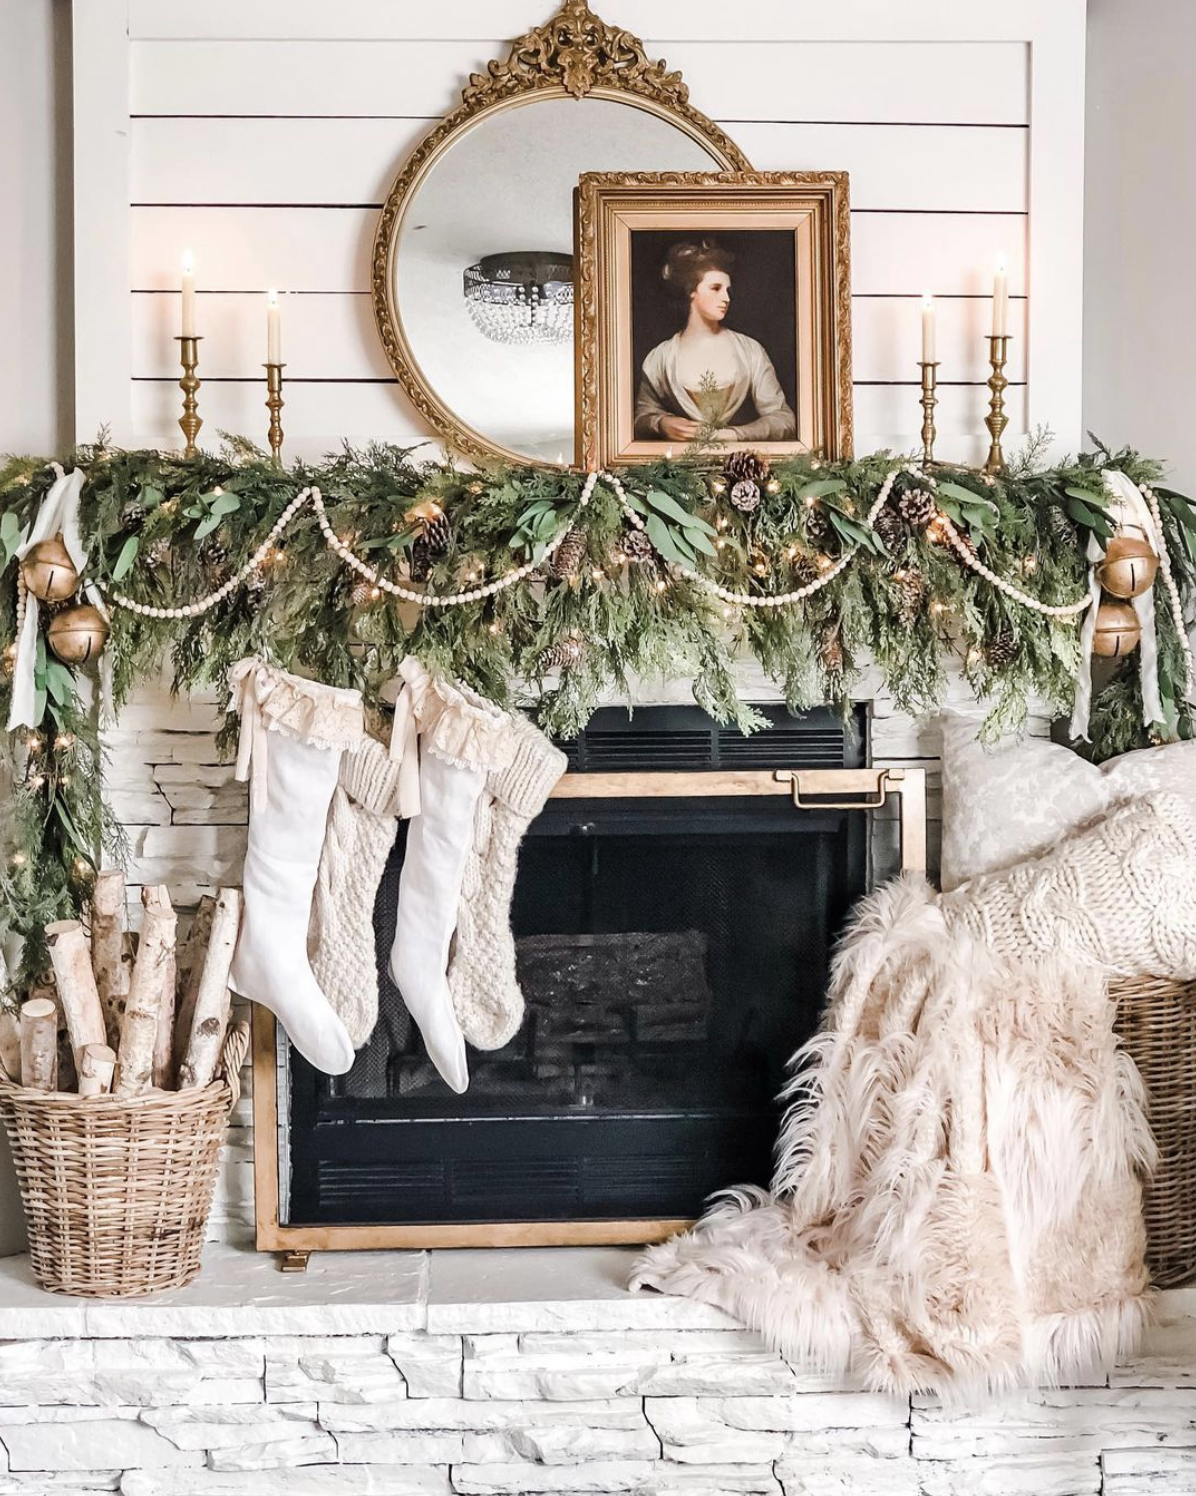 10 Stunning Christmas Mantels - love this antique portrait mantel with chunky knit stockings and green garland 